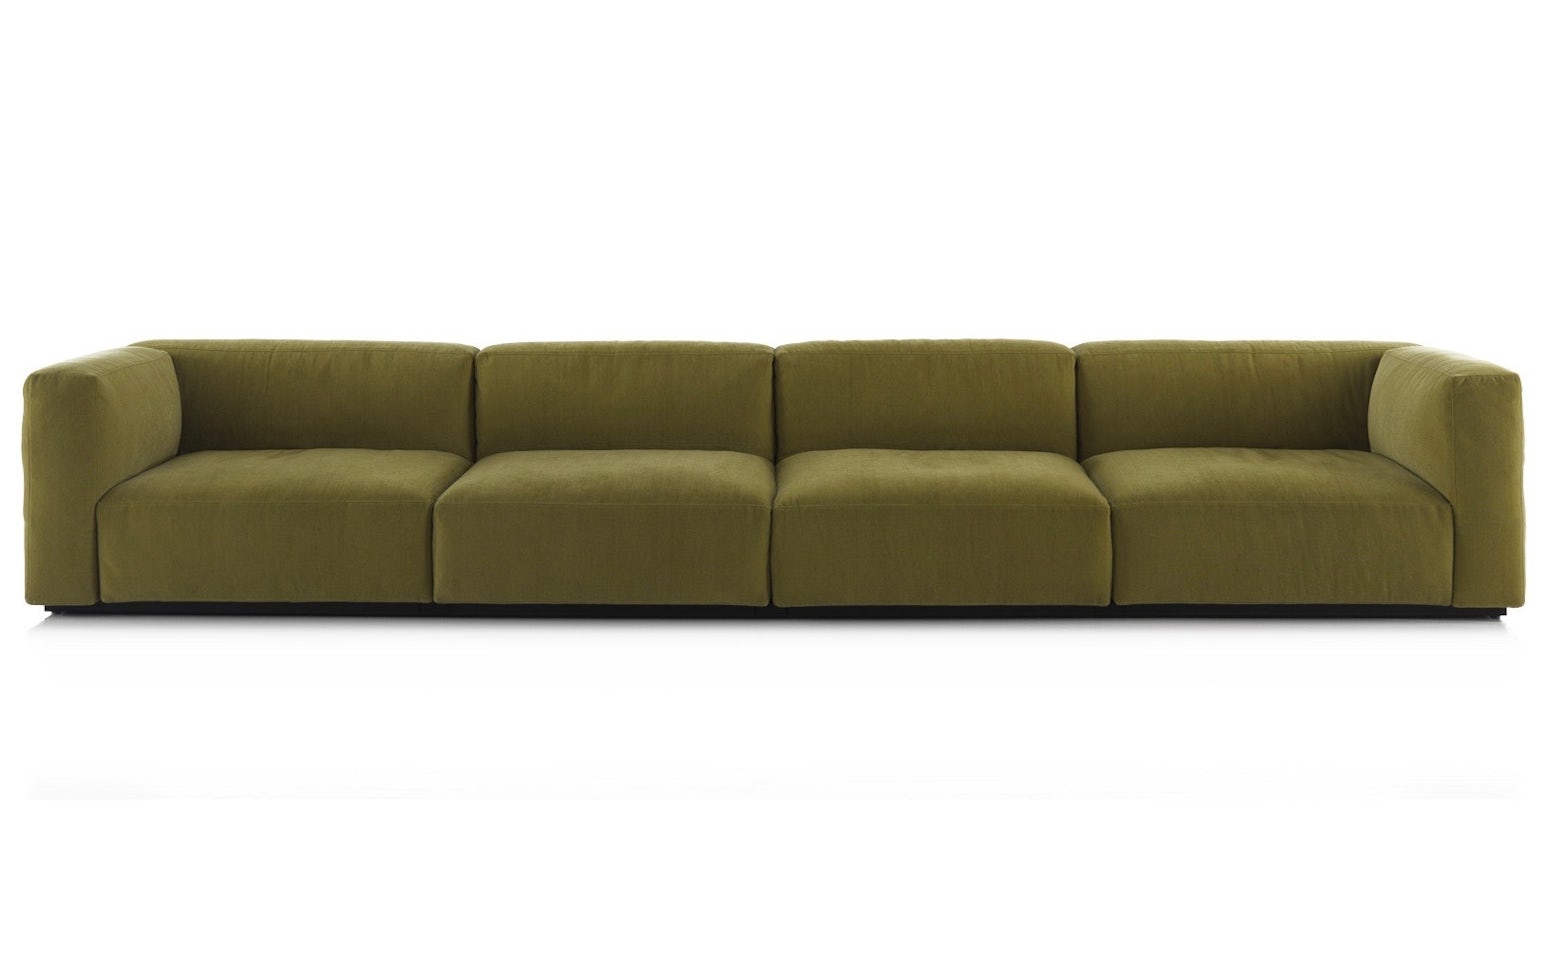 Mex Cube Seating System Cassina 7